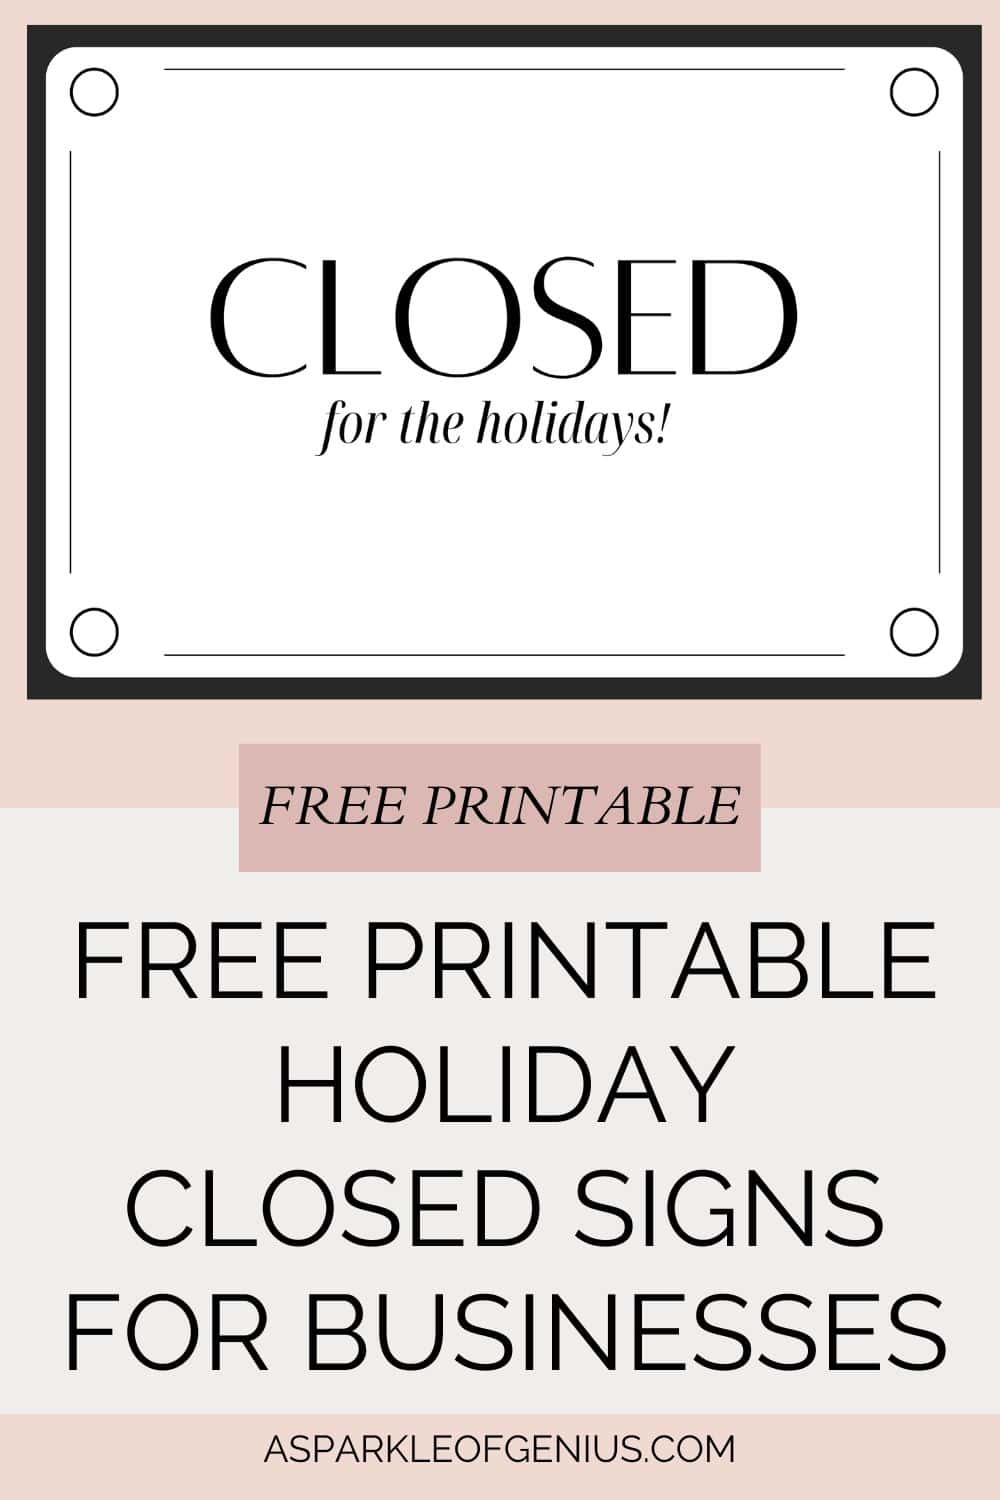 Free Printable Holiday Closed Signs For Businesses - A Sparkle Of intended for Free Printable Holiday Signs Closed